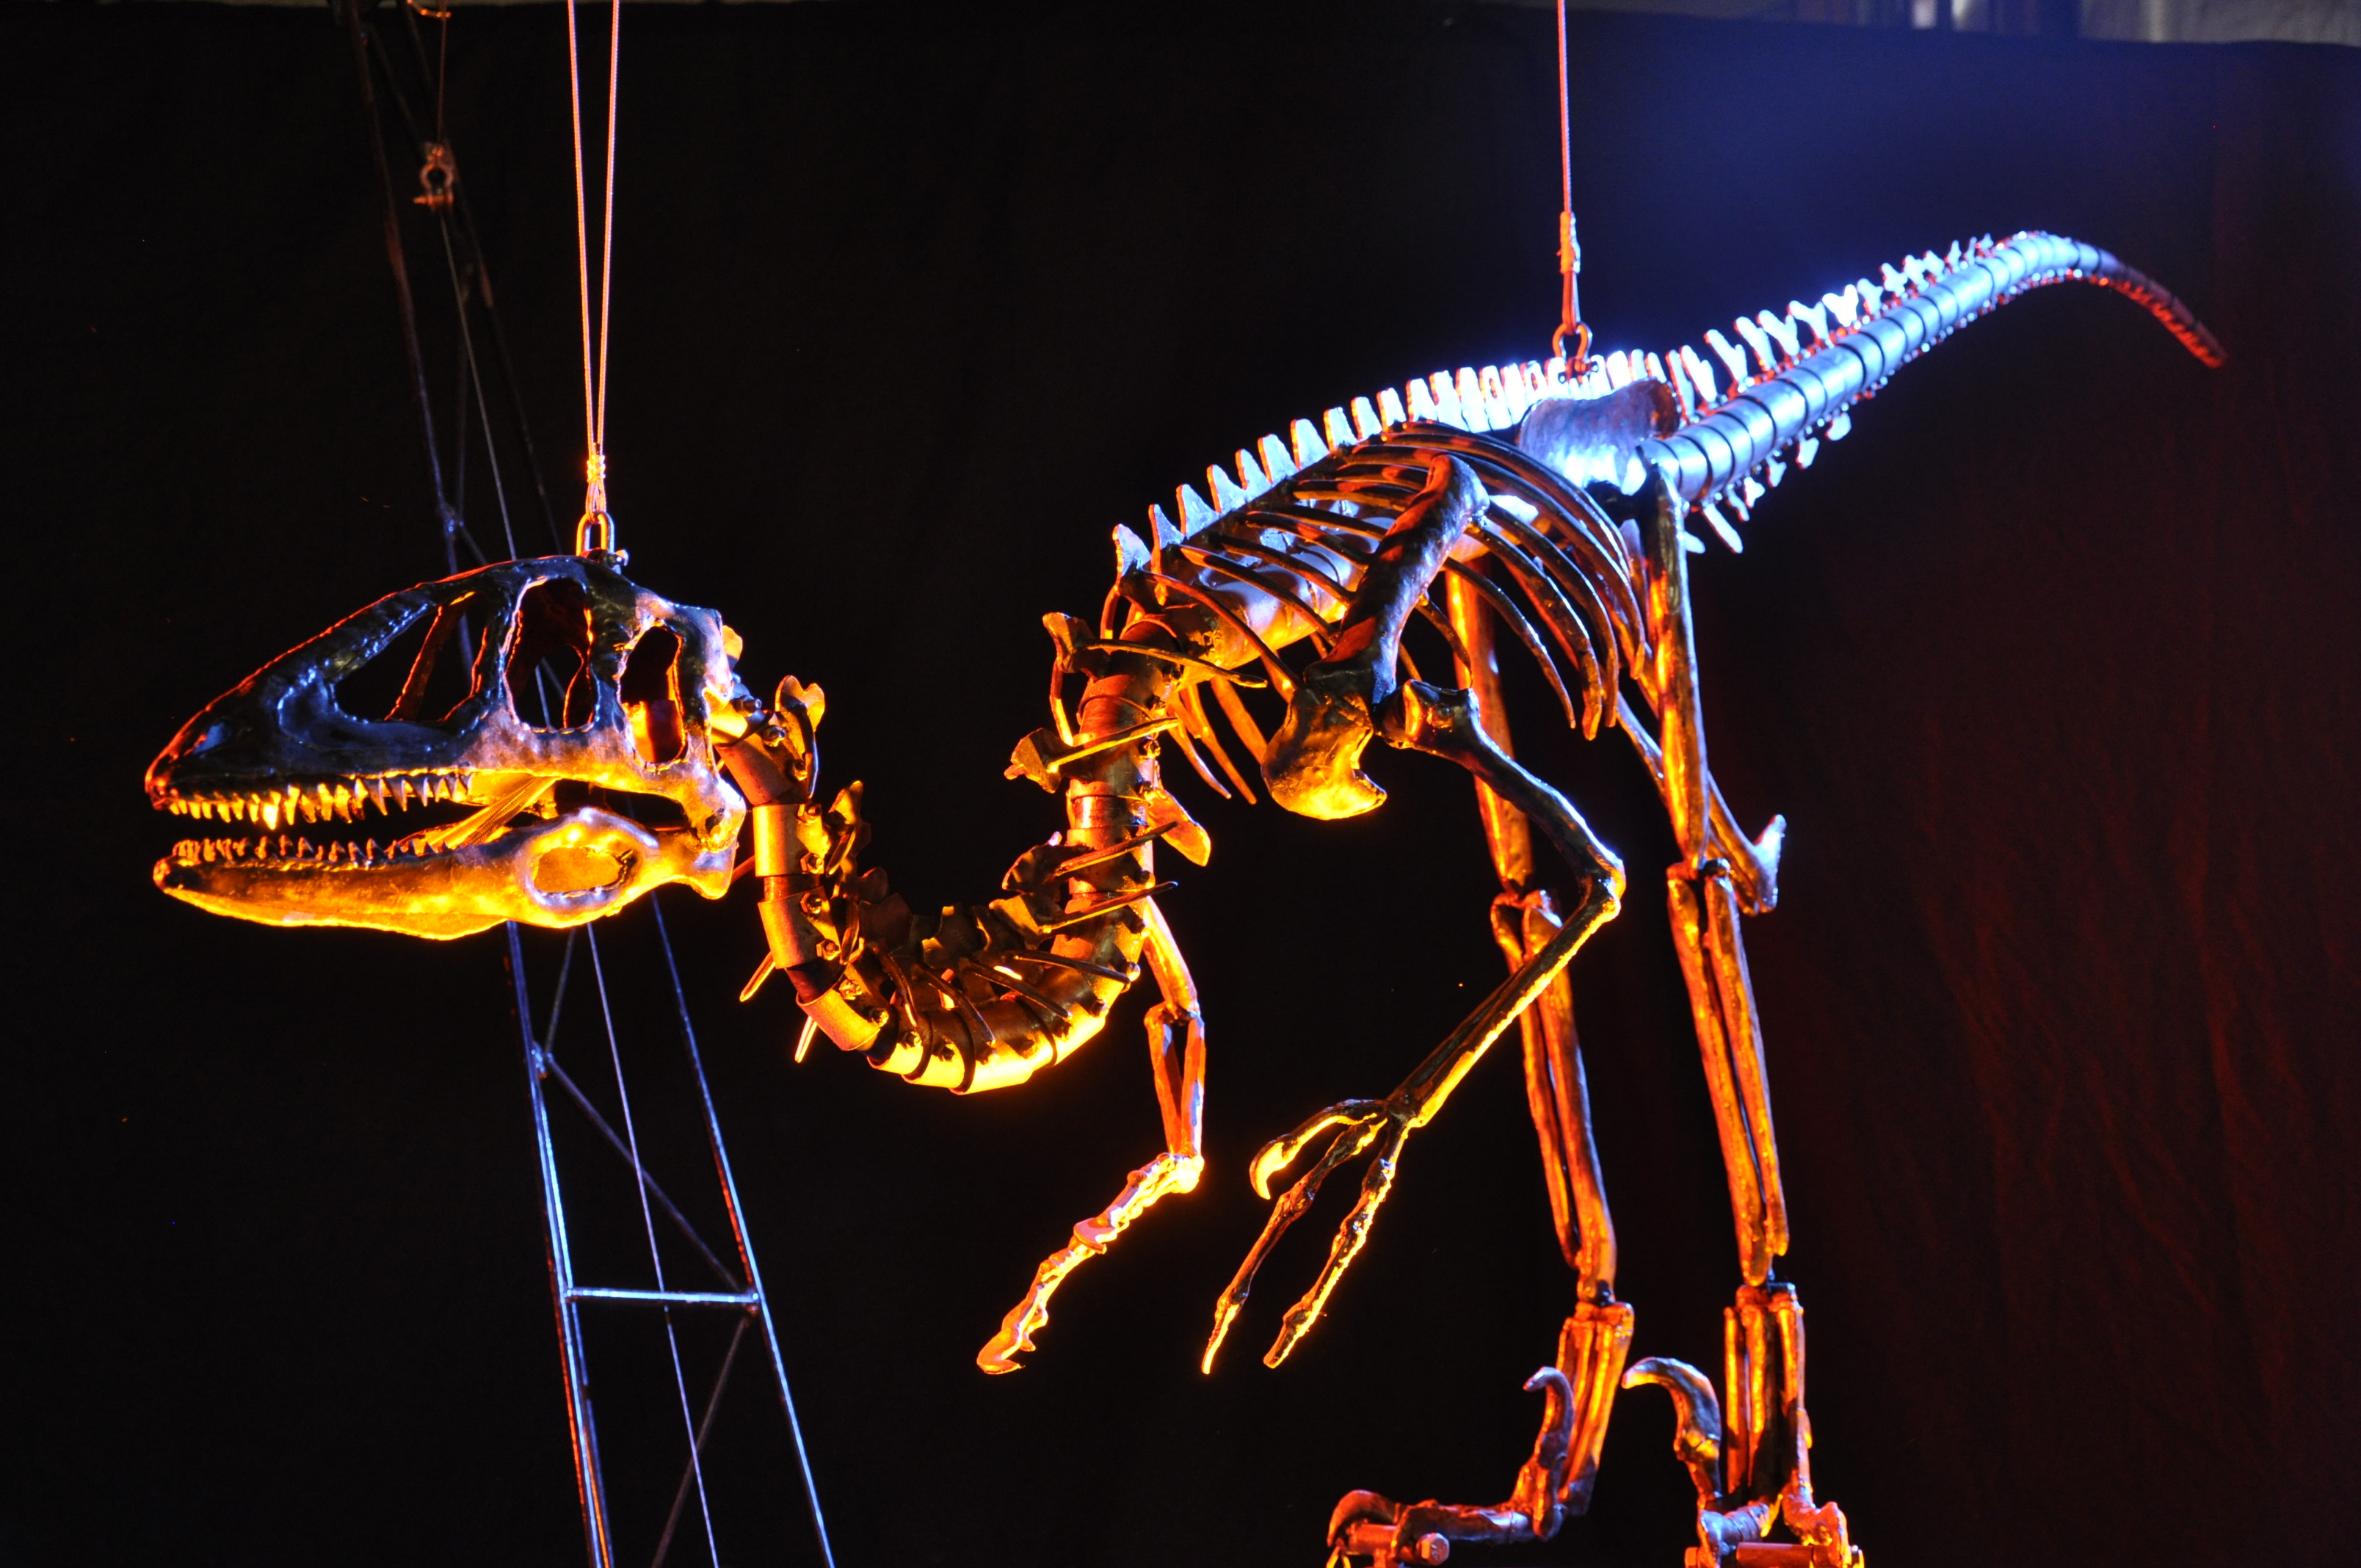 Image of a life-sized metal dinosaur skeleton, hanging from cables with a black backdrop behind it.